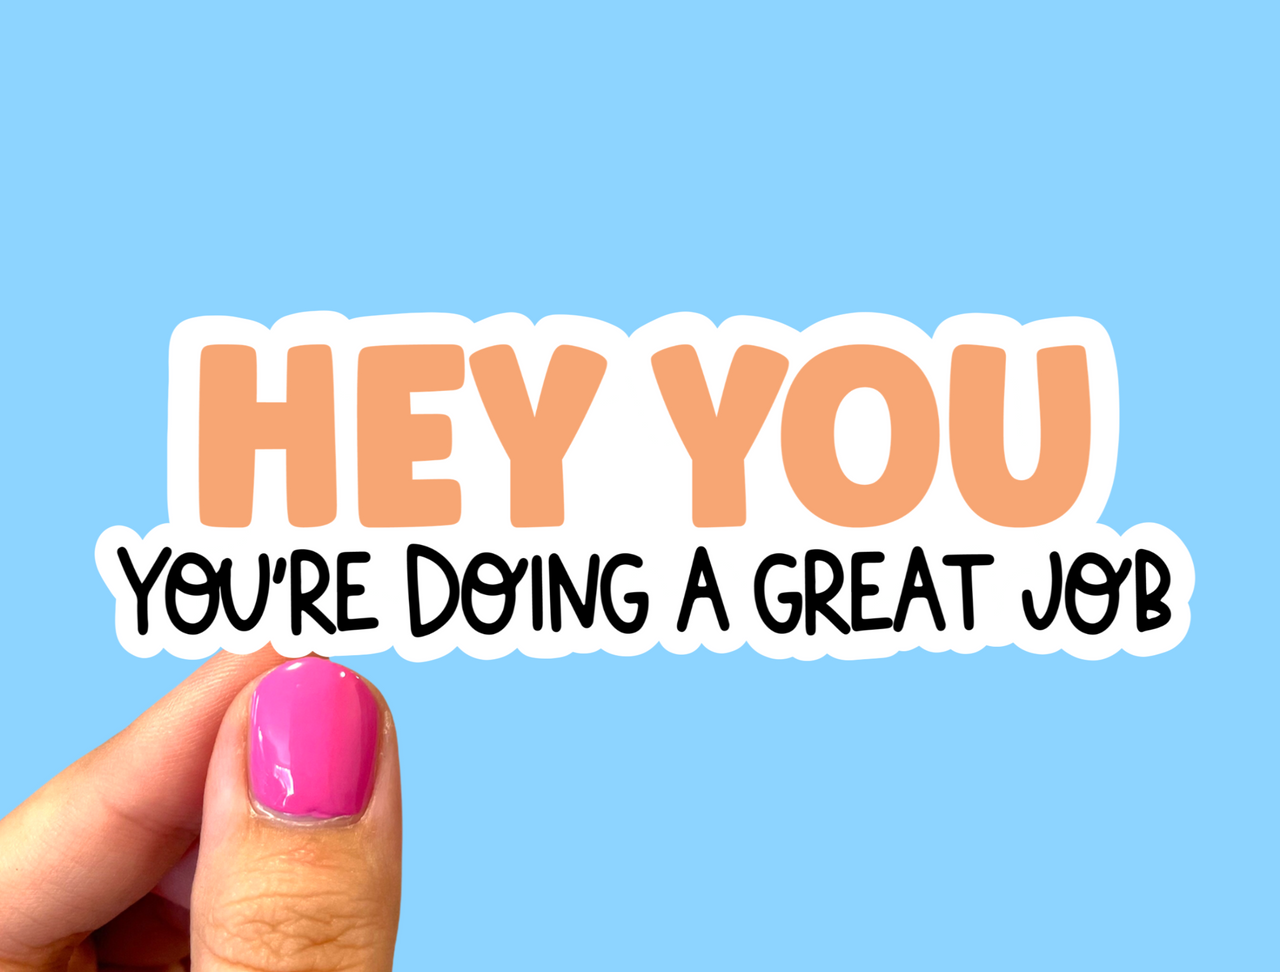 Hey you you’re doing a great job